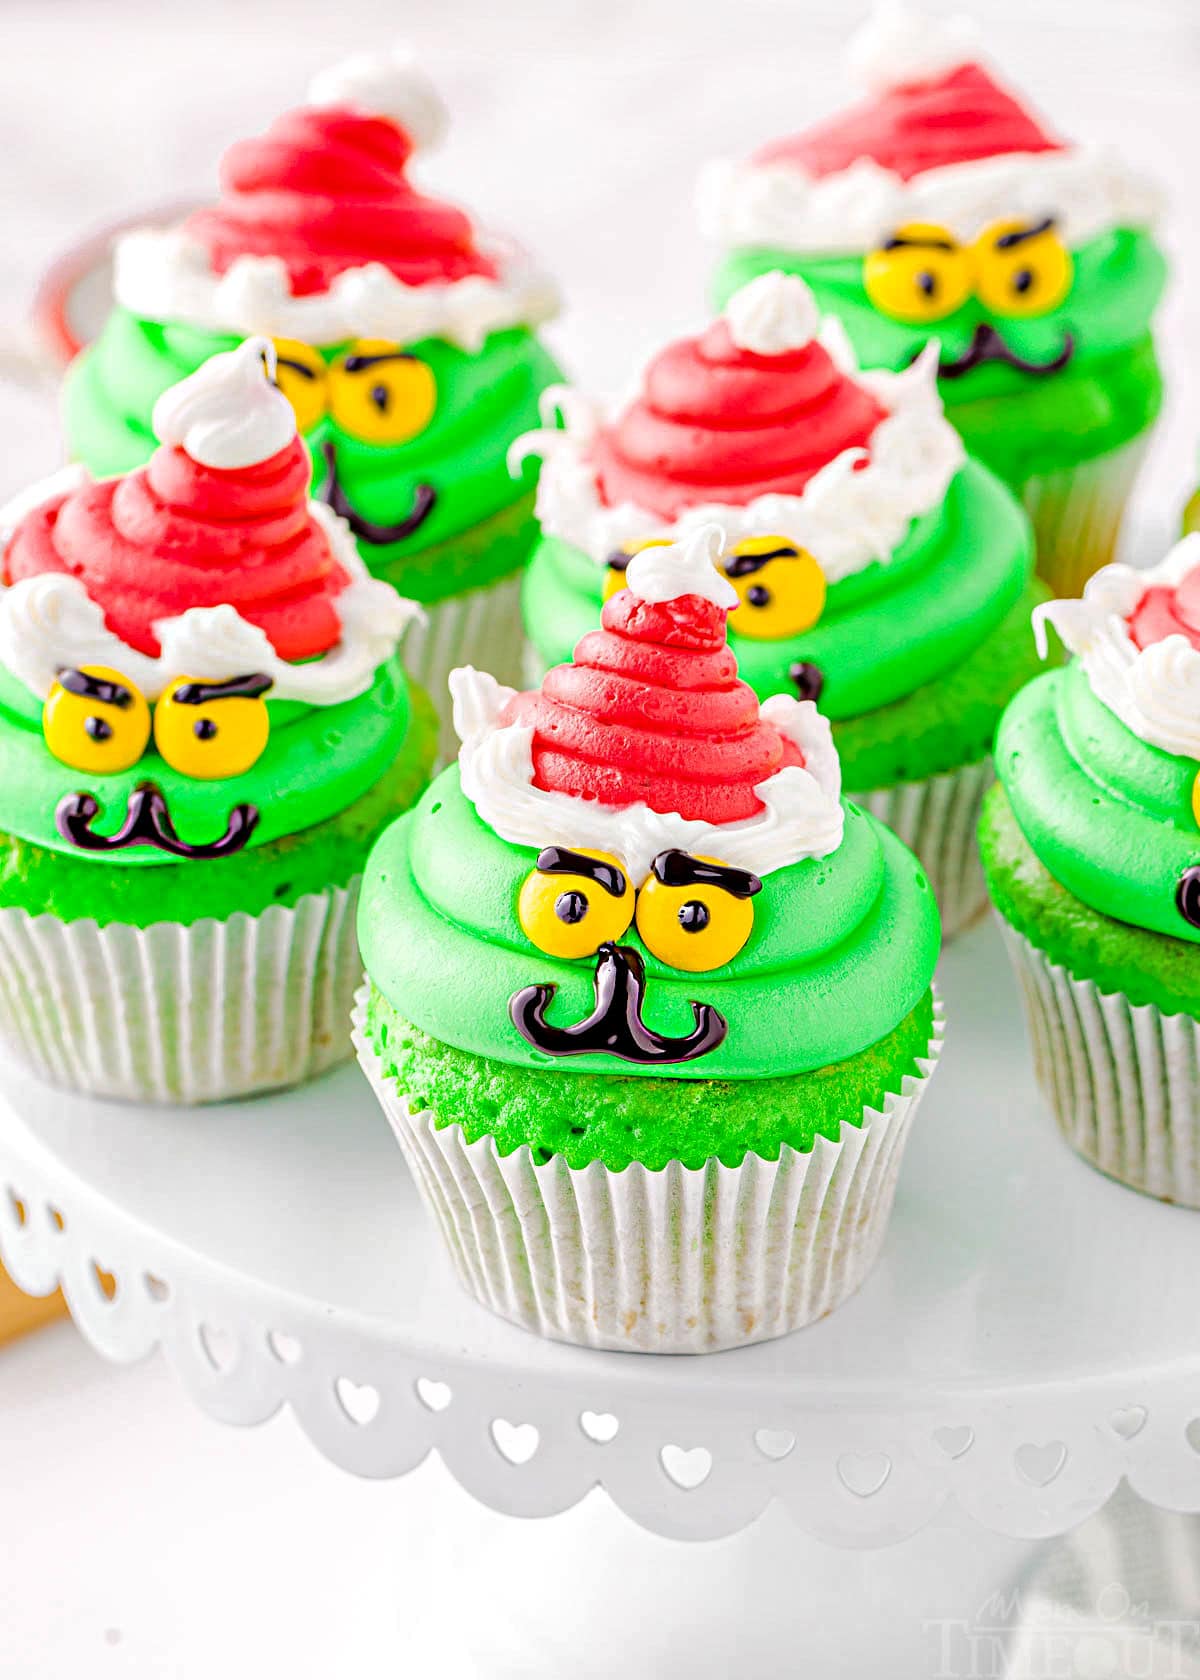 six cupcakes decorated like the grinch with red santa hats sitting on a white cake stand.